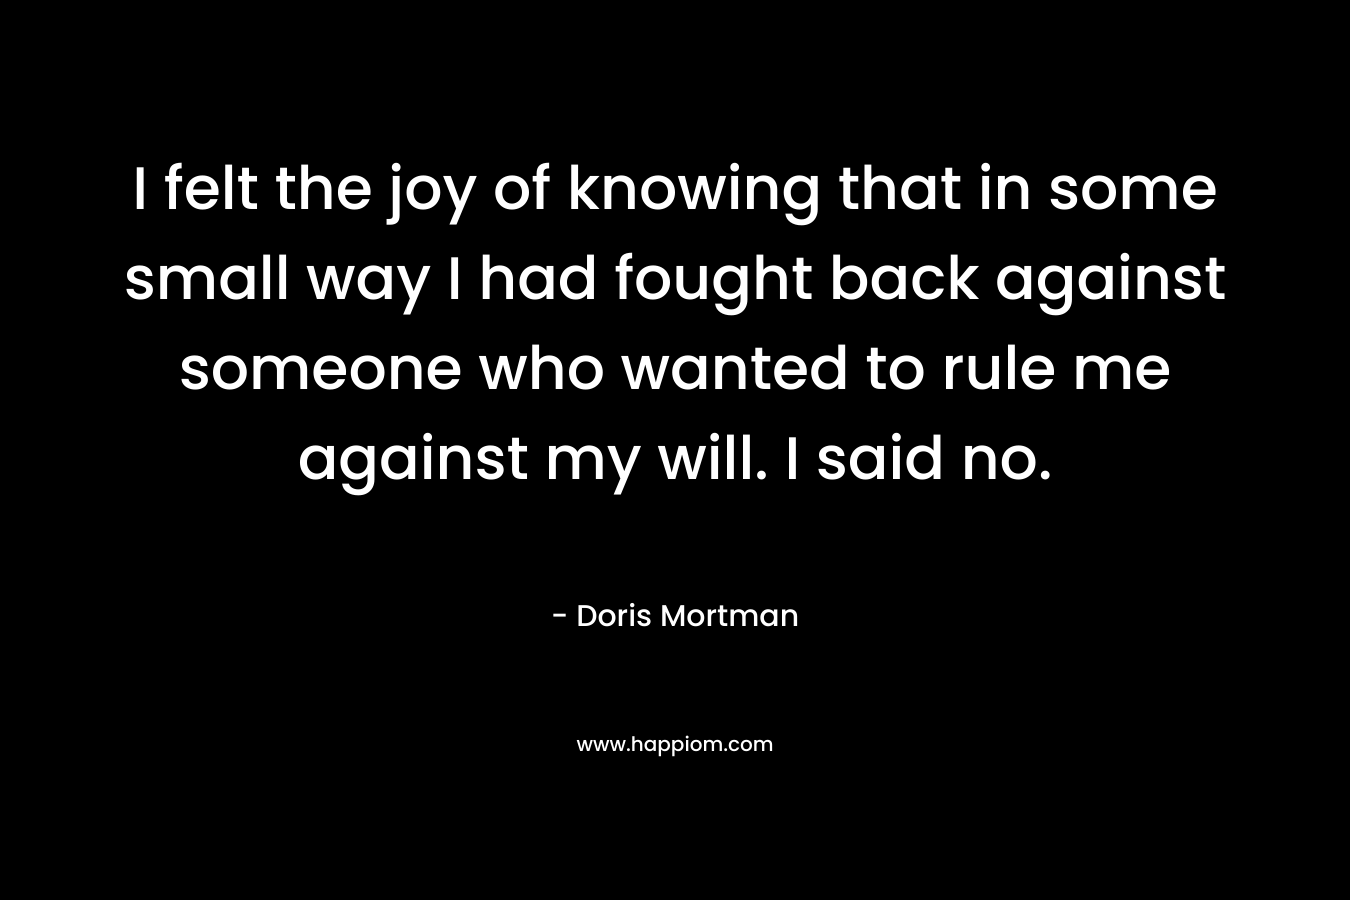 I felt the joy of knowing that in some small way I had fought back against someone who wanted to rule me against my will. I said no. – Doris Mortman